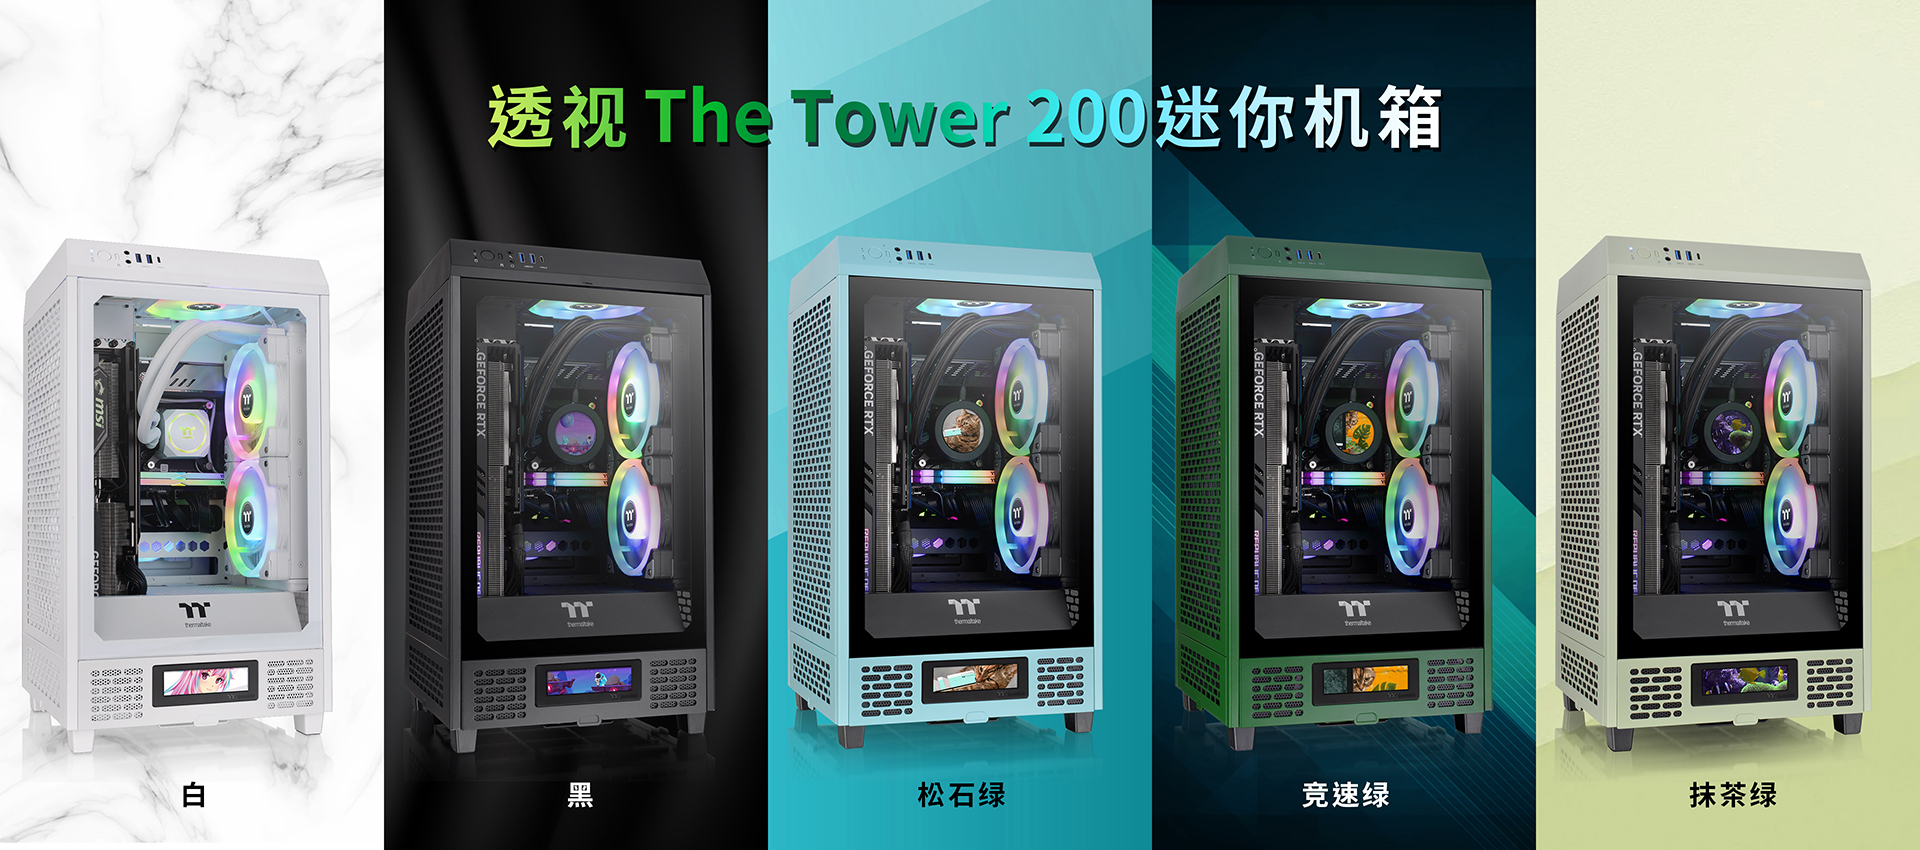 the Tower 200 机箱